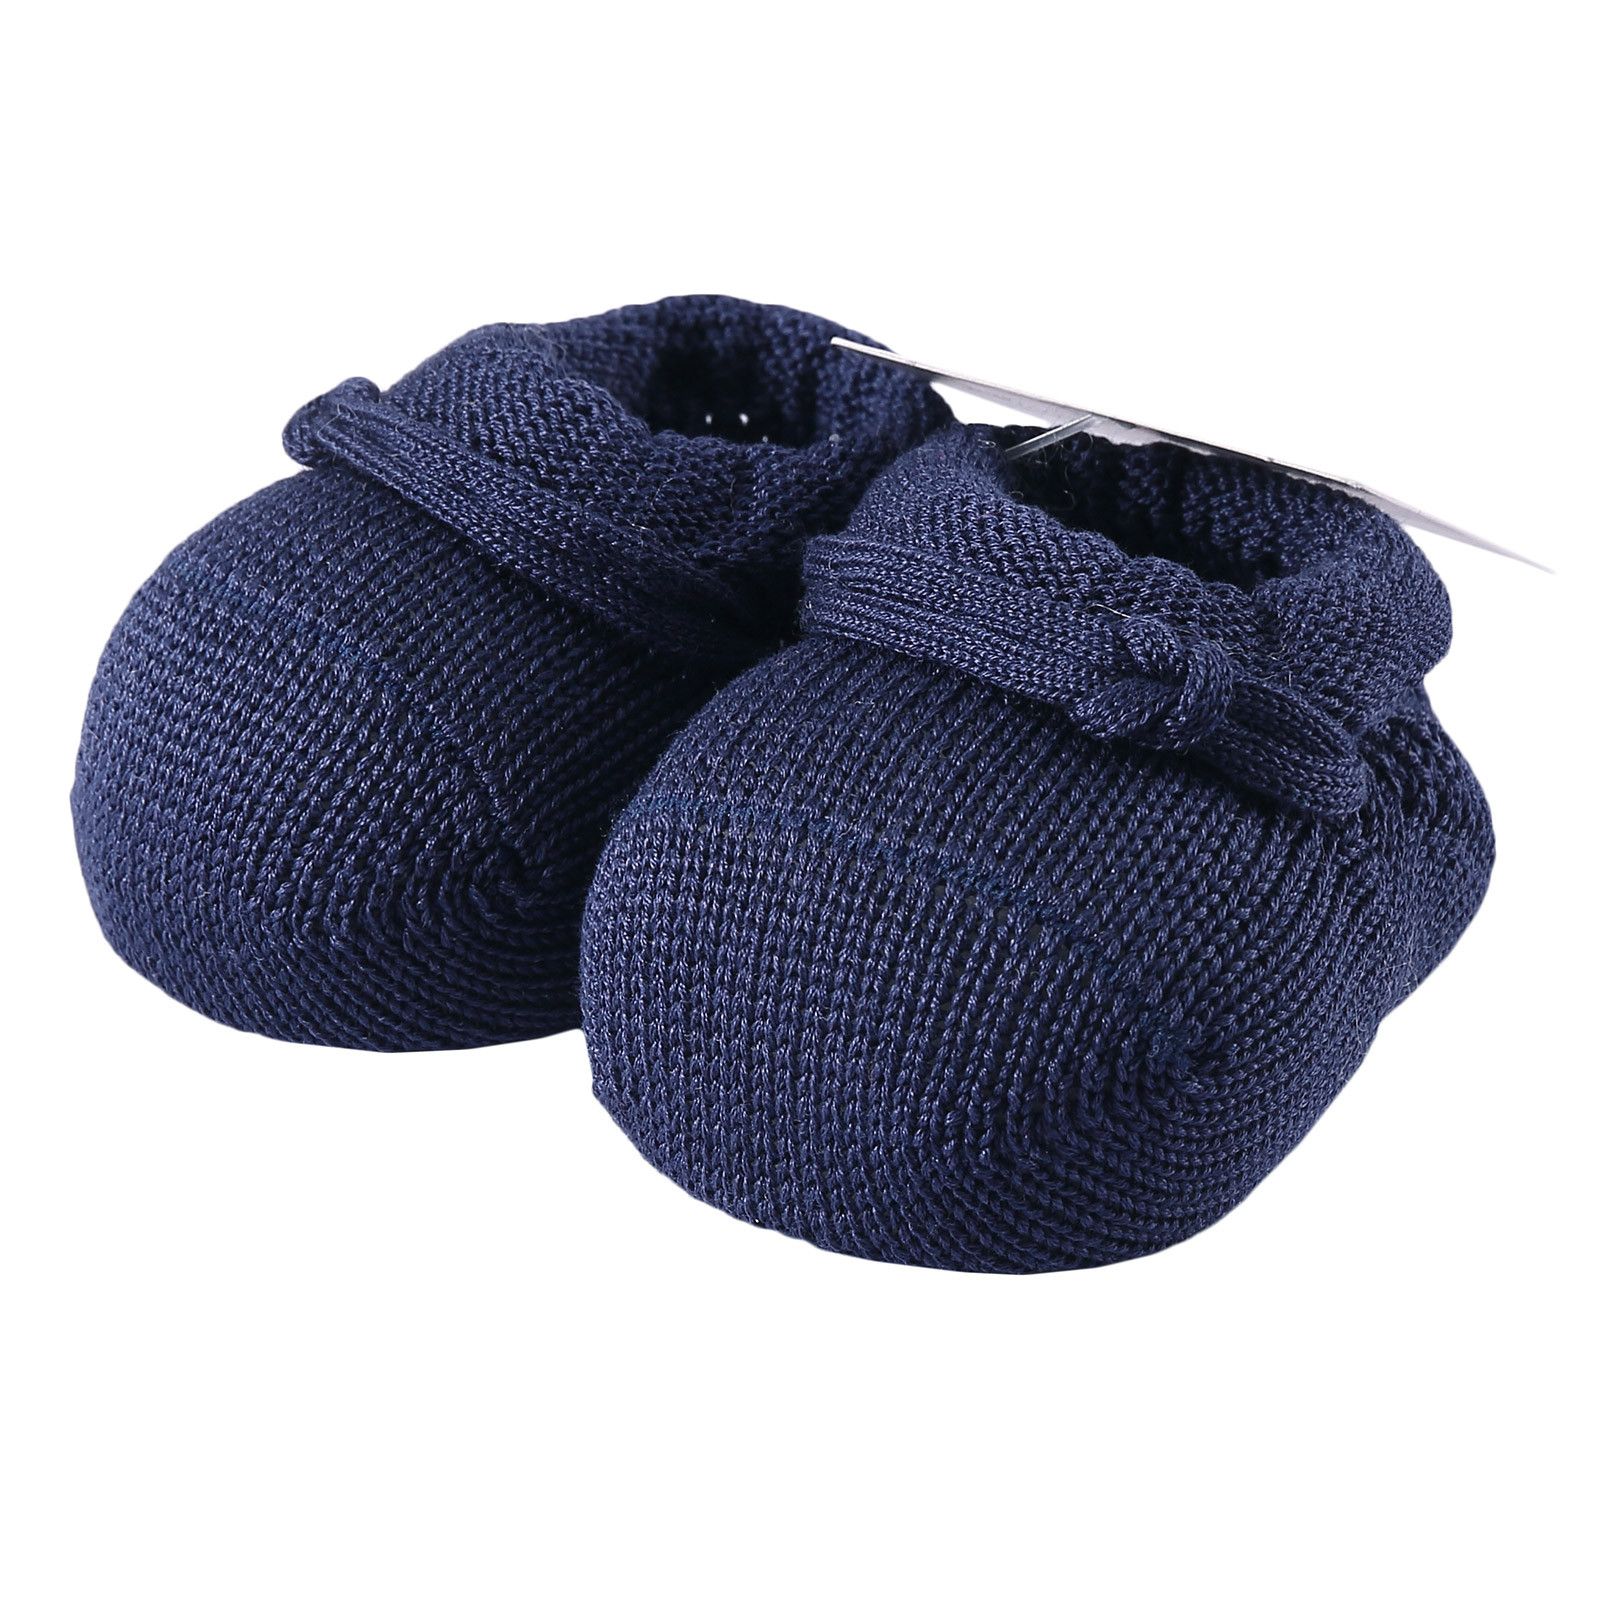 Baby Navy Blue Knitted Cotton Shoes - CÉMAROSE | Children's Fashion Store - 1